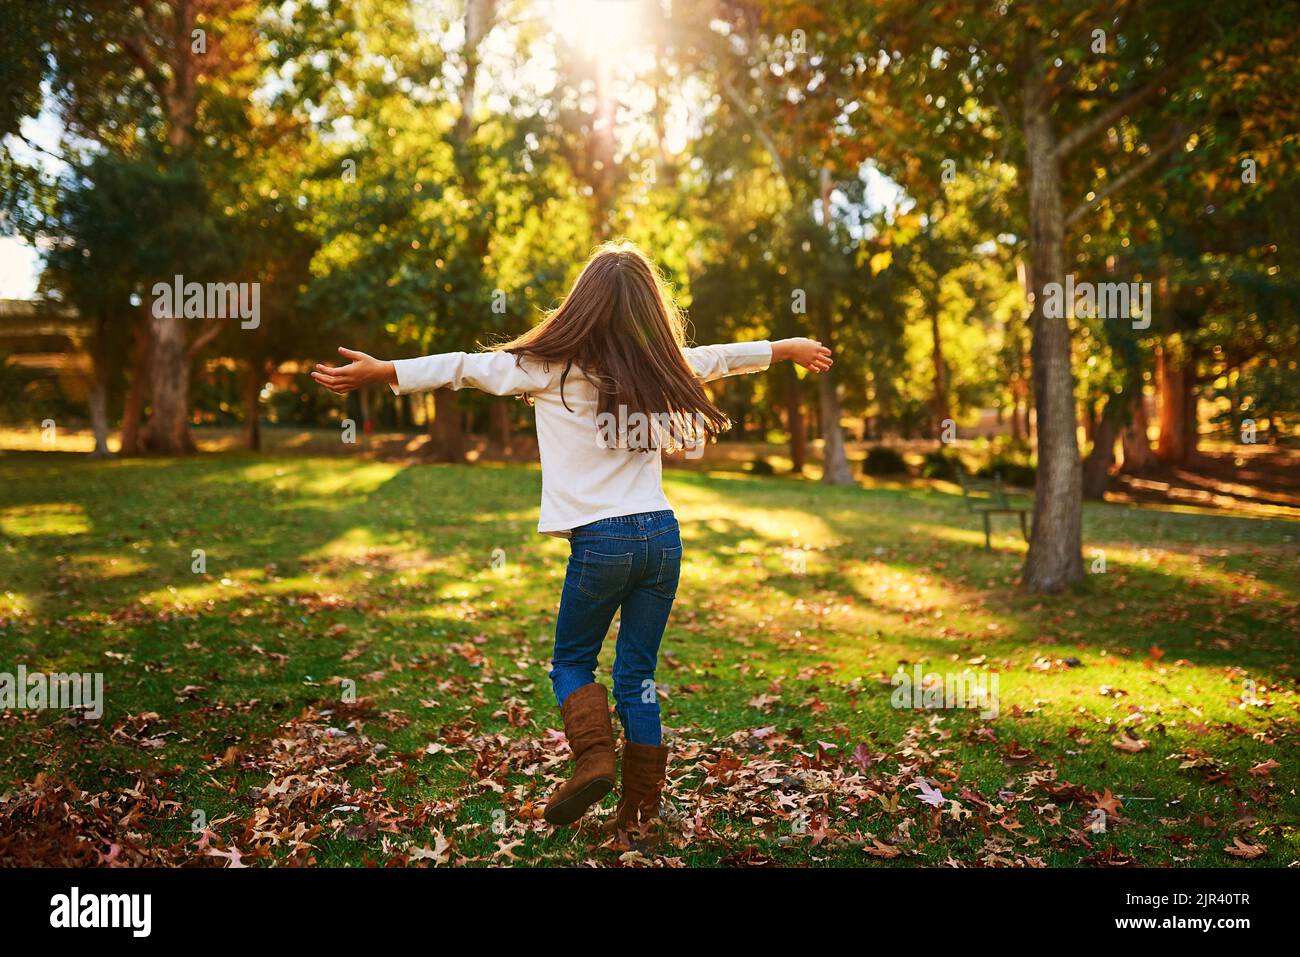 Autumn is awesome. a happy little girl playing in the autumn leaves outdoors. Stock Photo